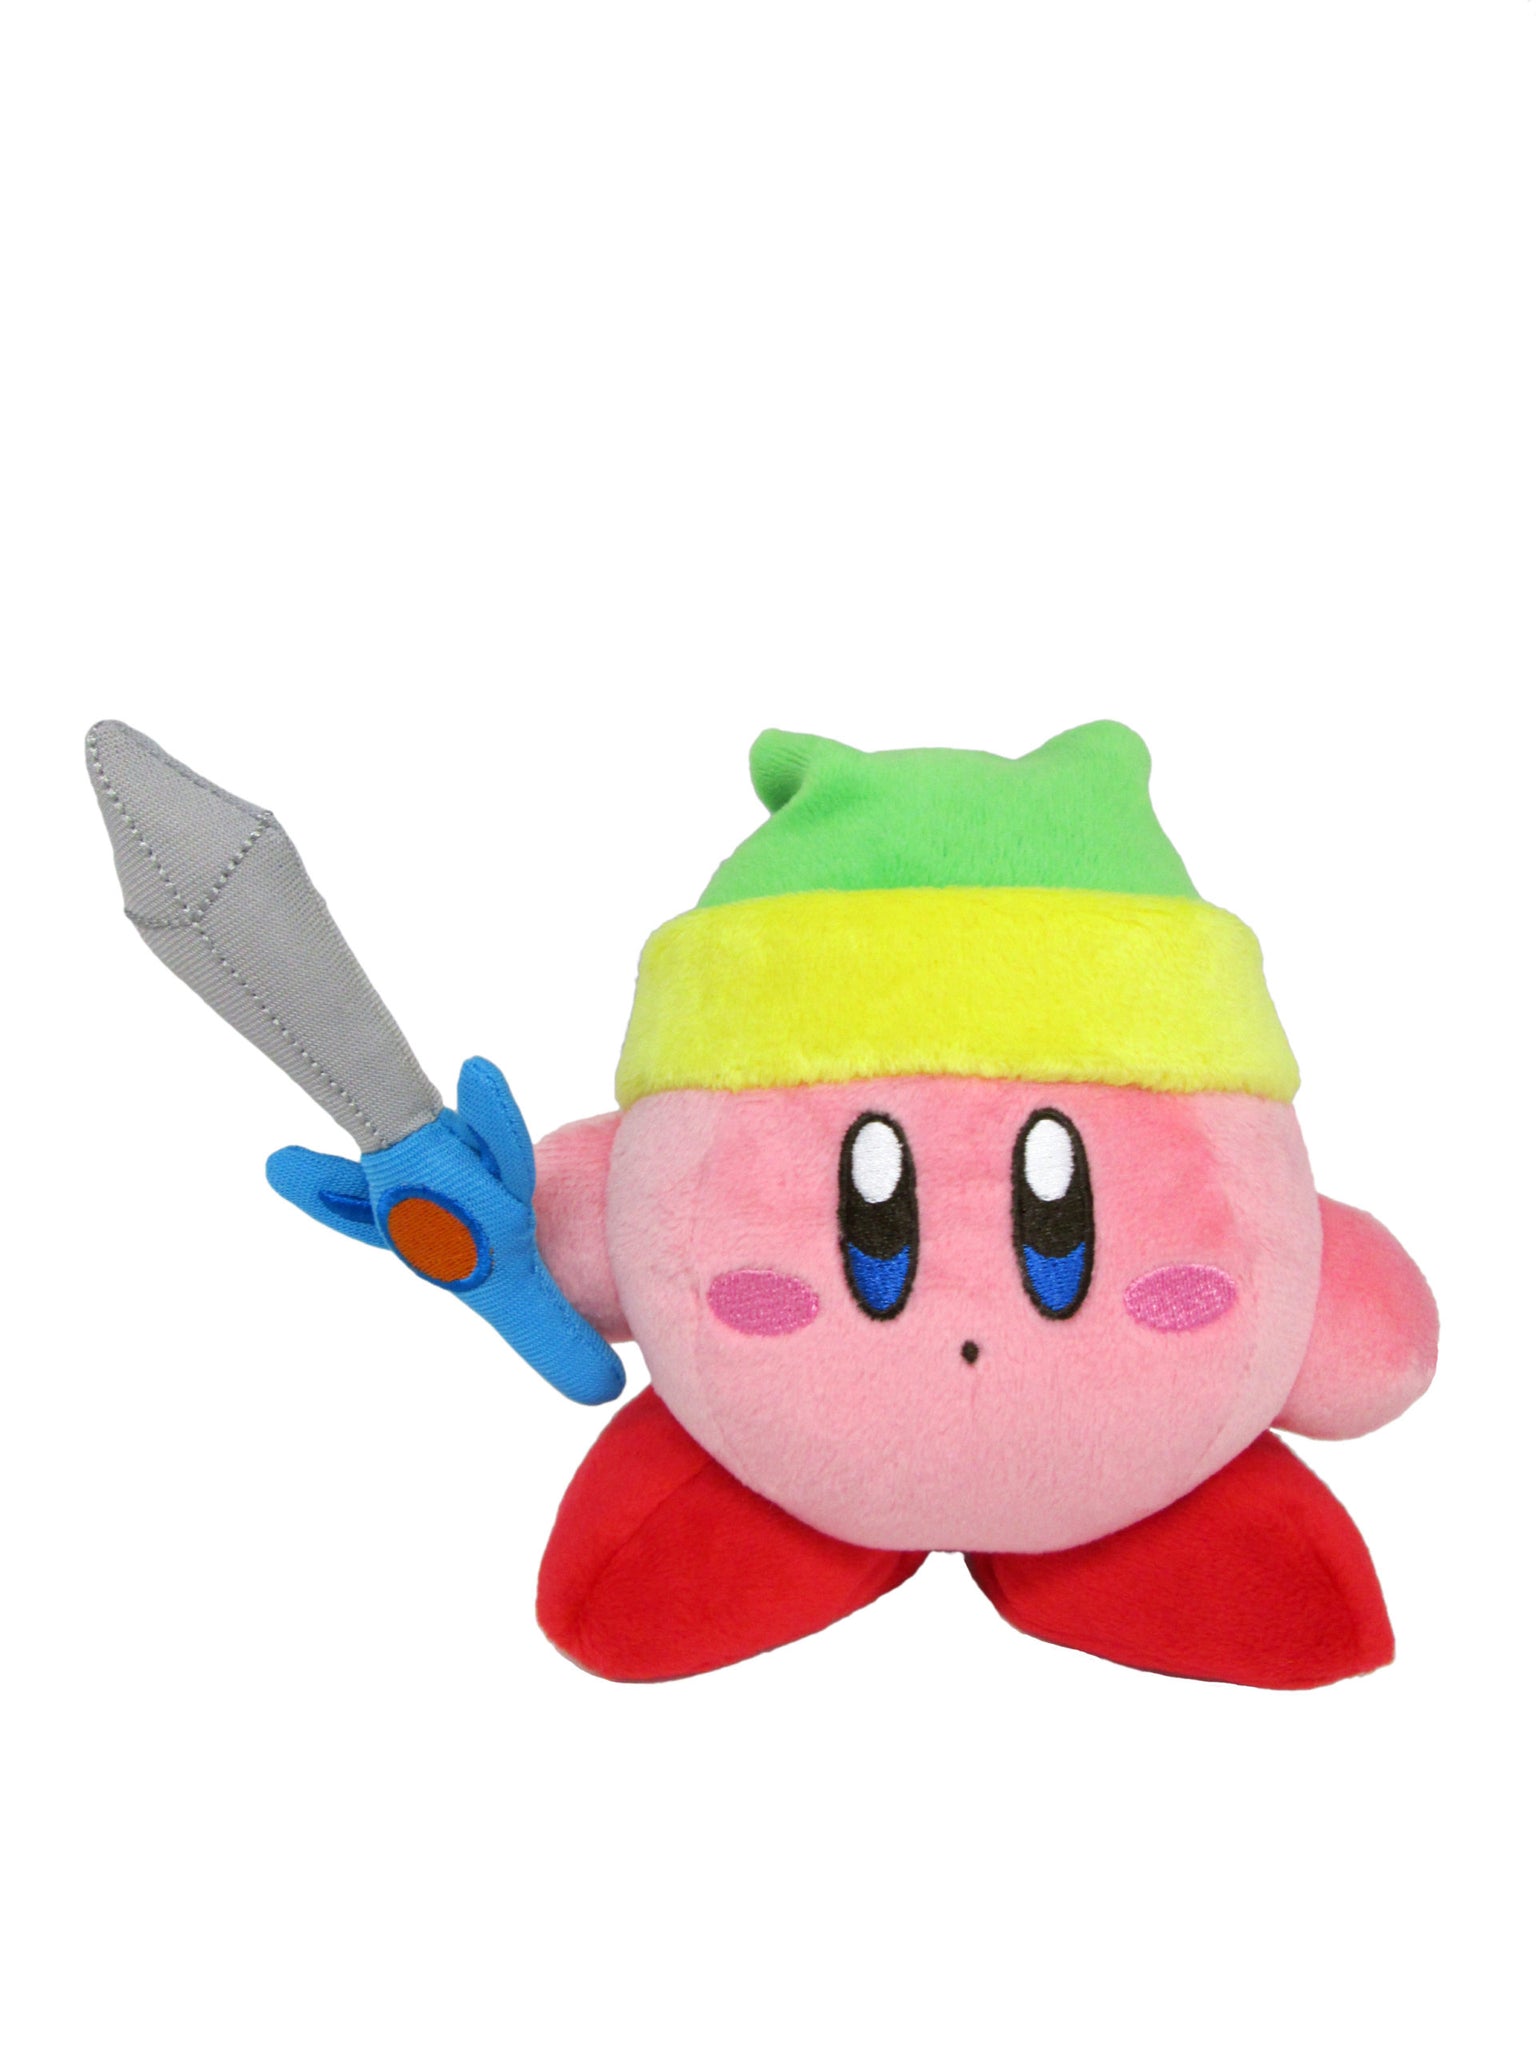 A pink kirby plushie holding a sword with a blue and red hilt. He's wearing a green cap with a yellow band.